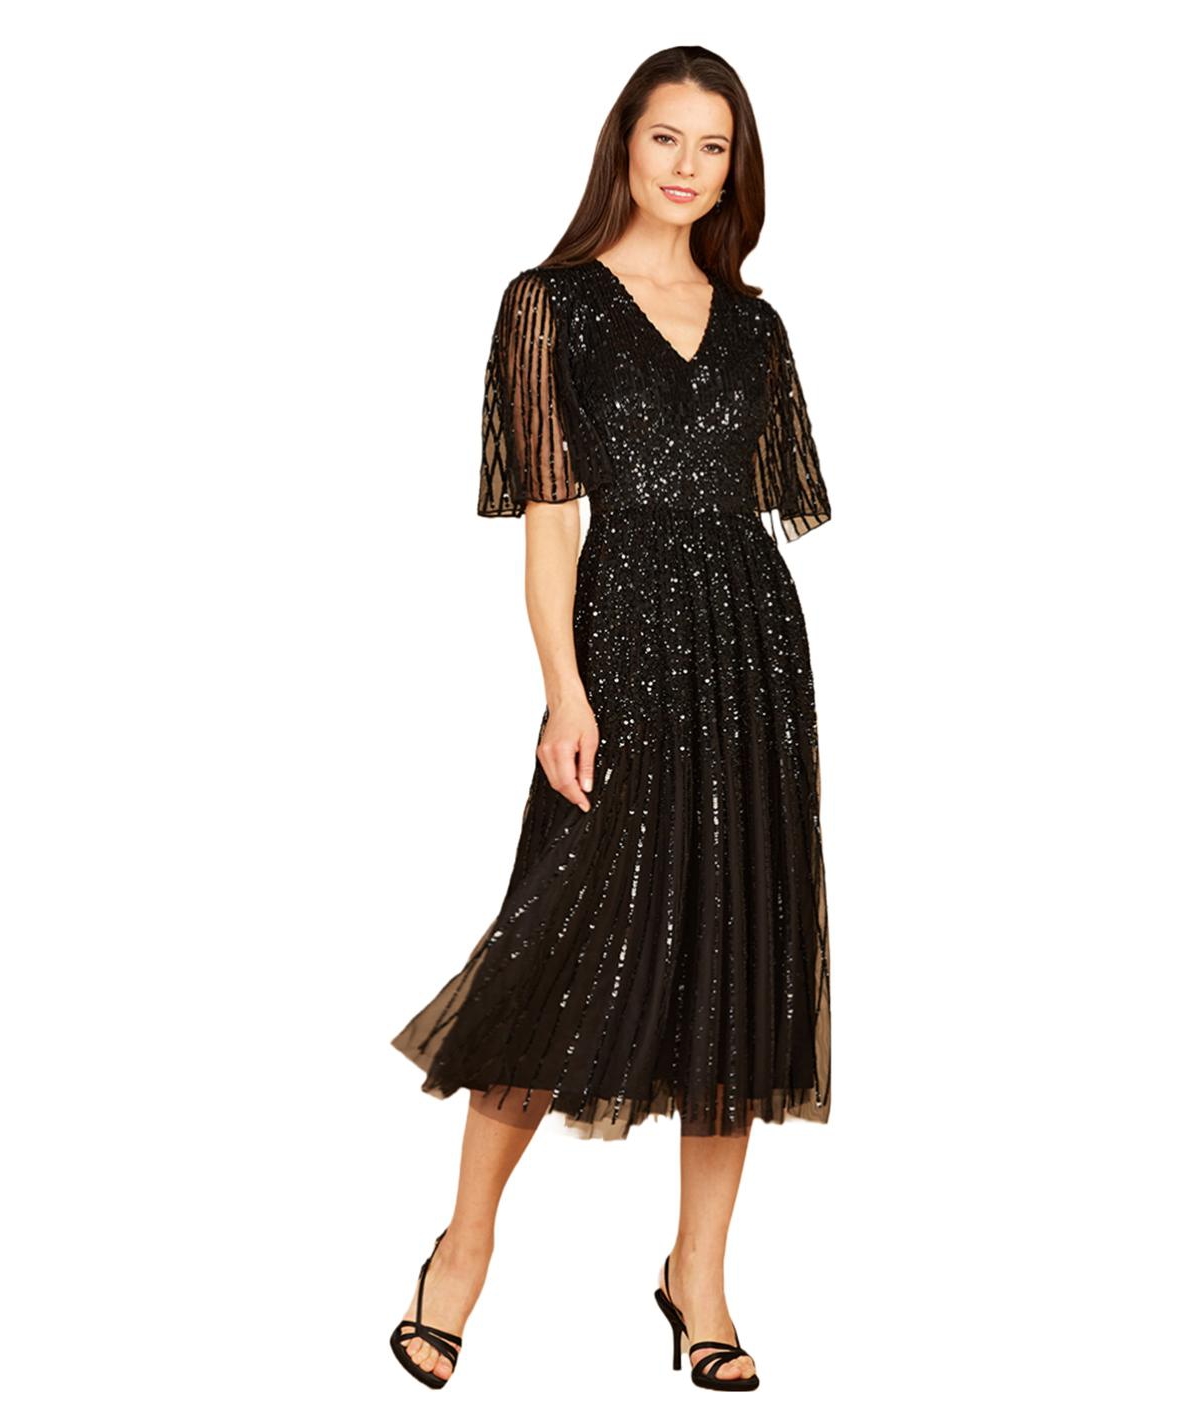 1920s Style Dresses, 1920s Dress Fashions You Will Love Womens Flowing Sequin Midi Dress with Short Sleeves - Black $458.00 AT vintagedancer.com